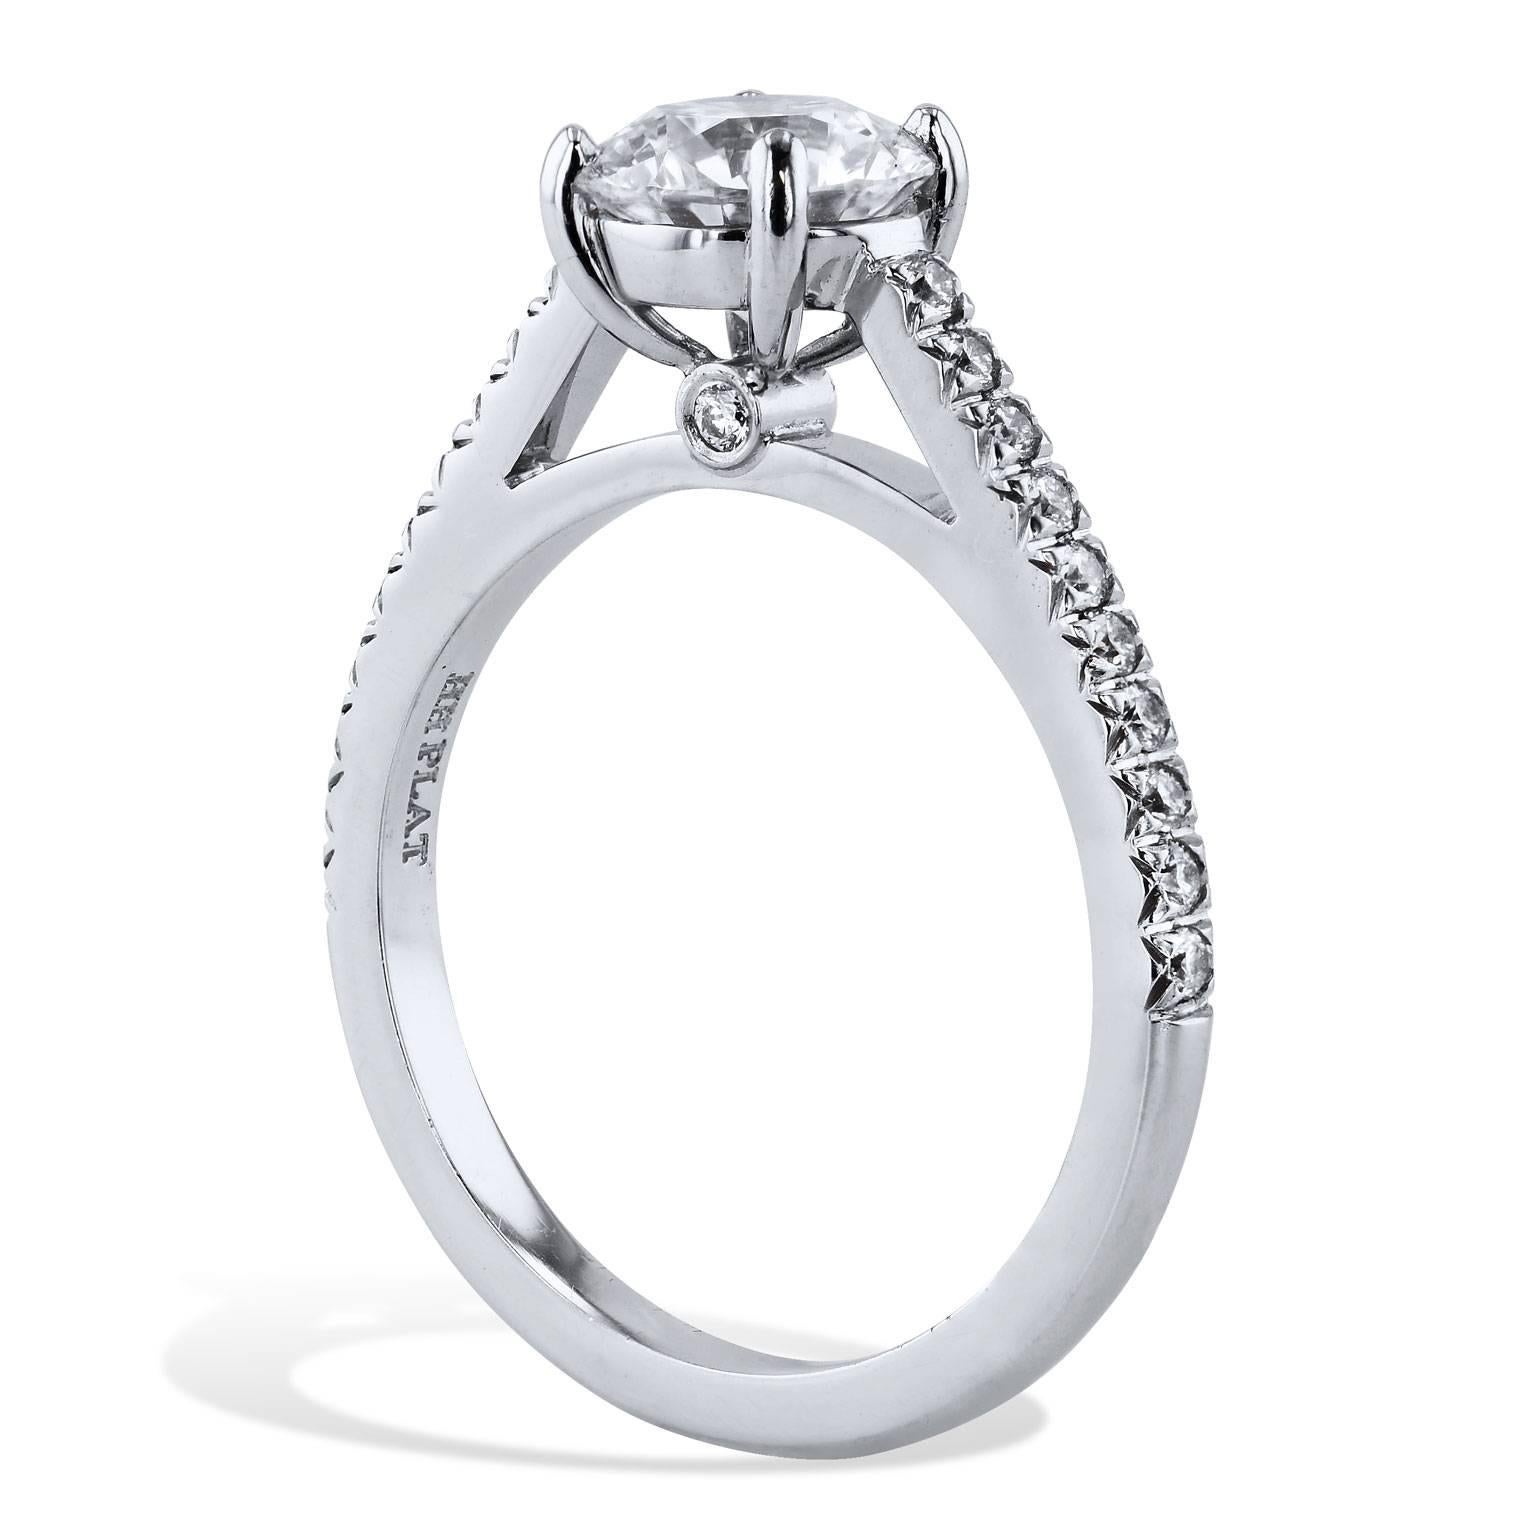 This breathtaking handmade platinum engagement ring by H features a 1.29 carat GIA certified round brilliant cut, prong-set diamond graded E/VS1 at center (GIA#11169977). Accentuated by 0.25 carat of pave-set diamond (G/H/VS) down the shank,